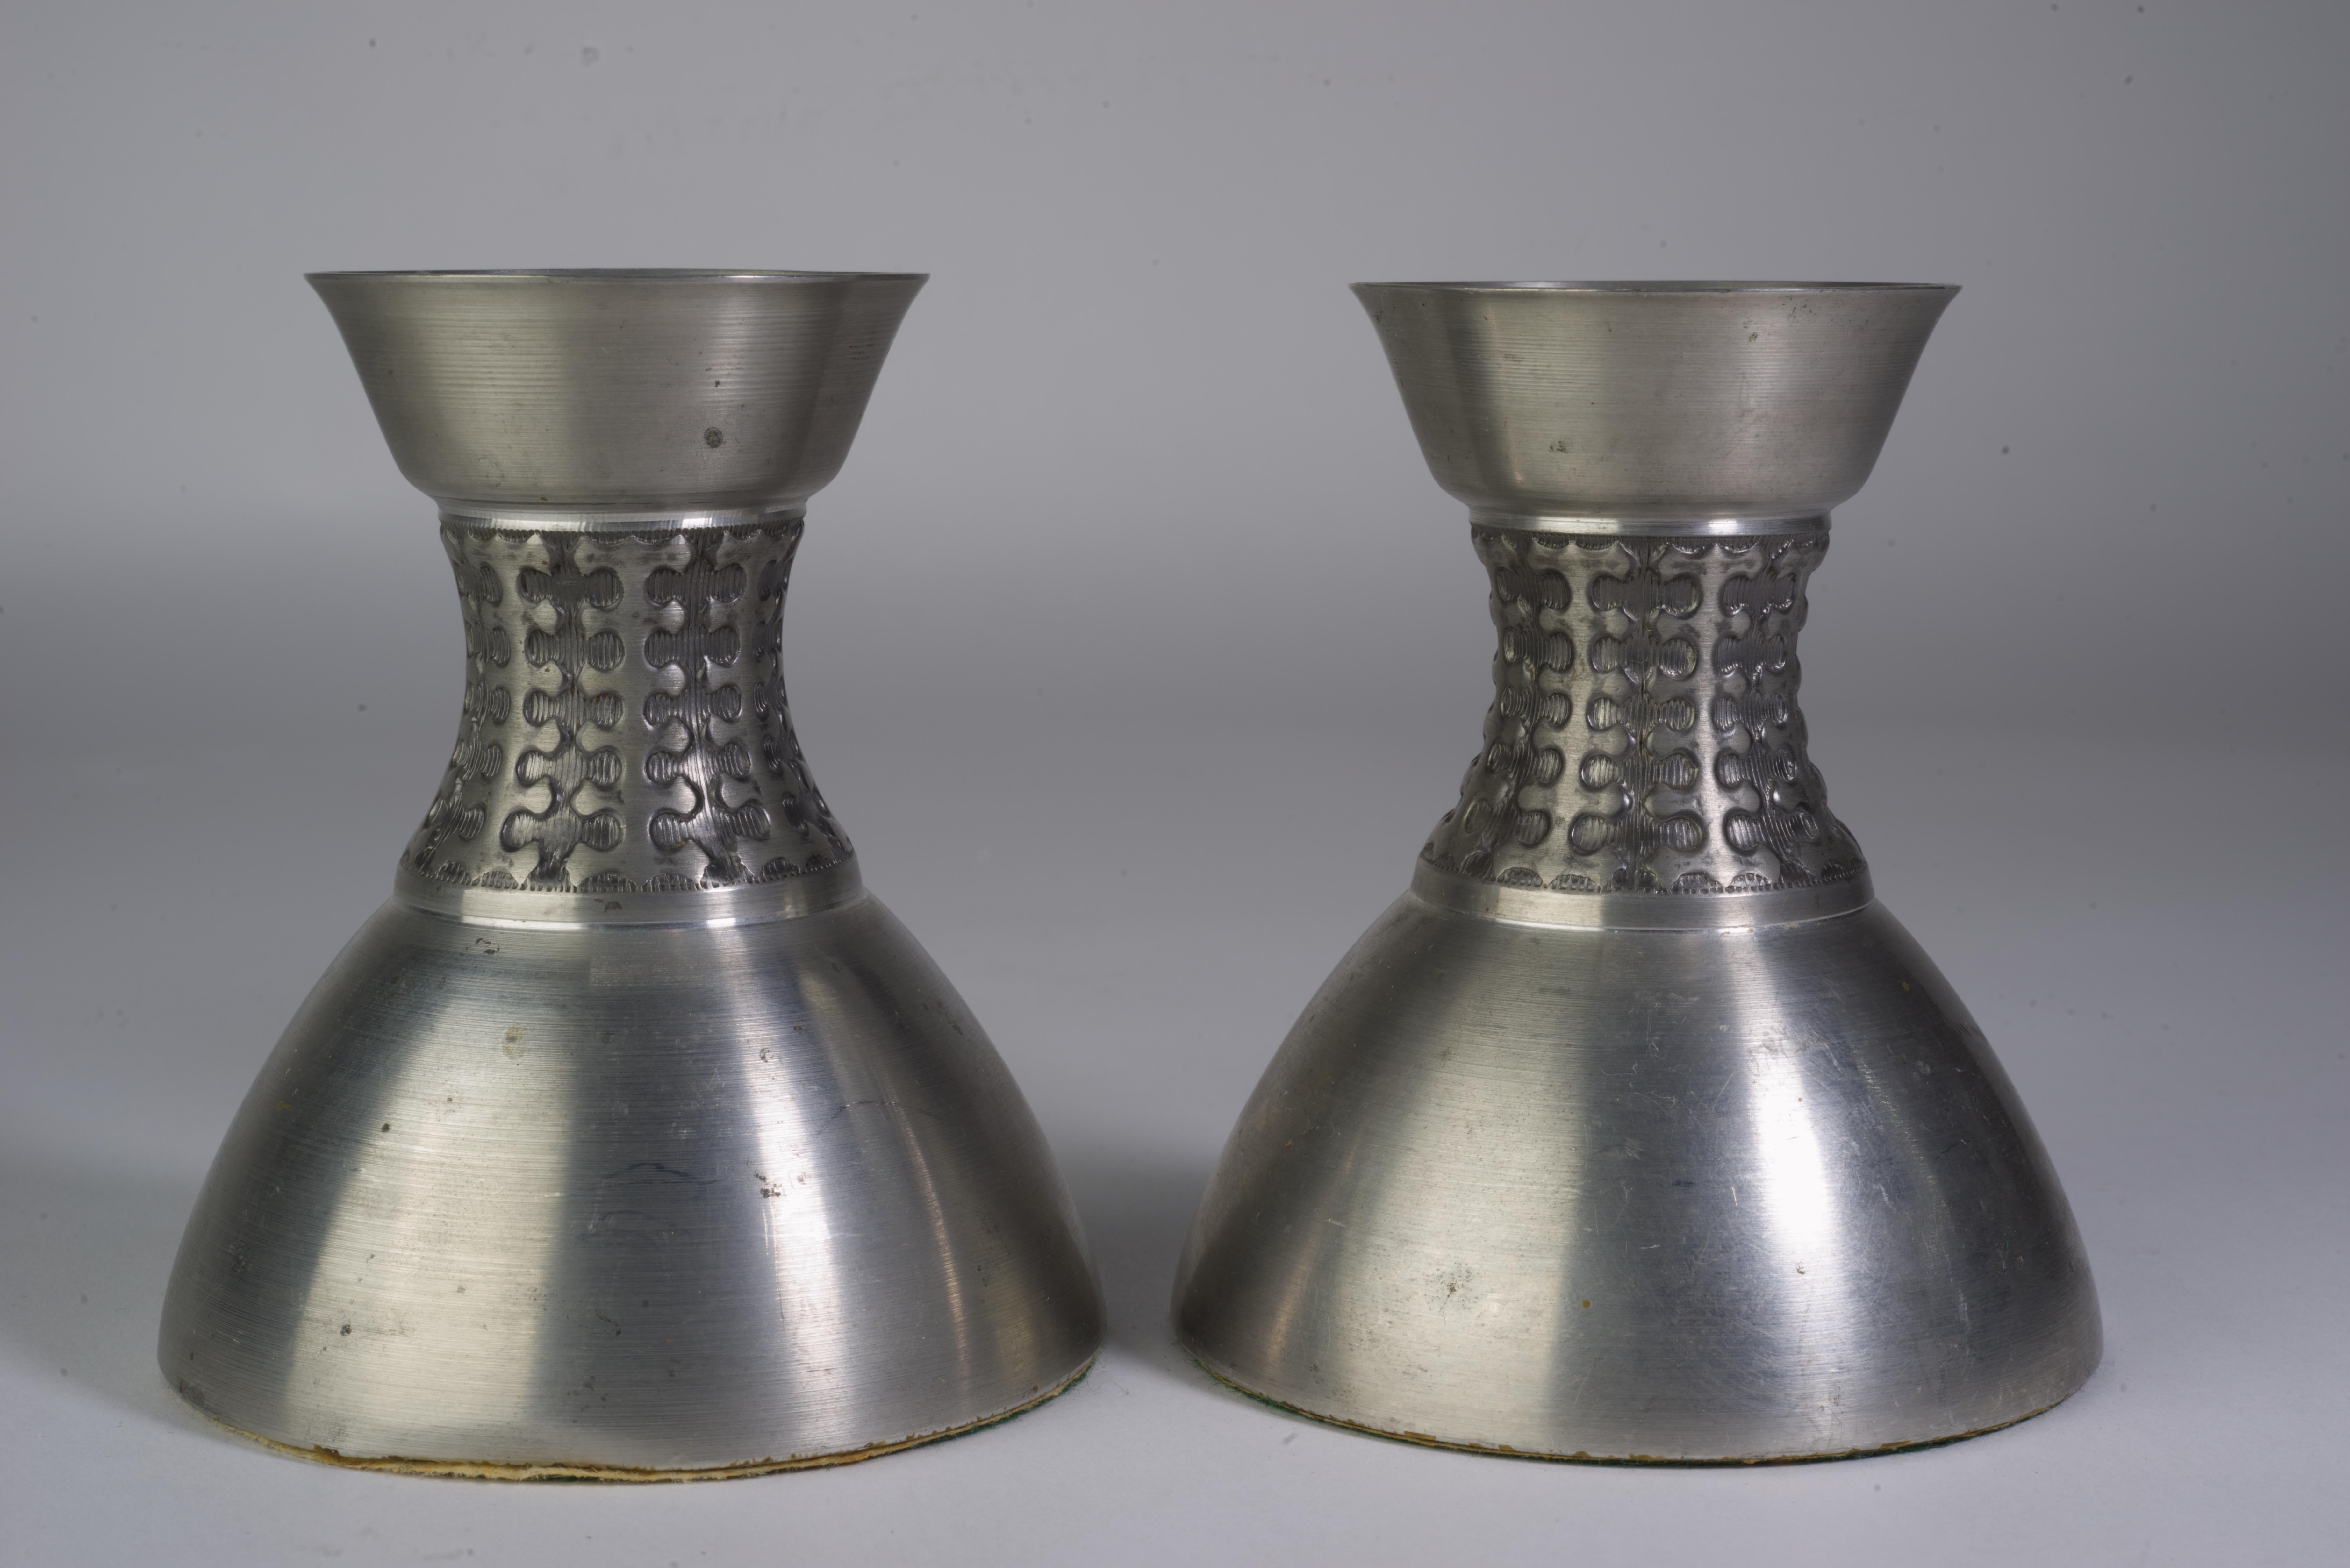 Norwegian Rare Mastad Norway Pair of Candle Holders Scandinavian Pewter 1950s For Sale